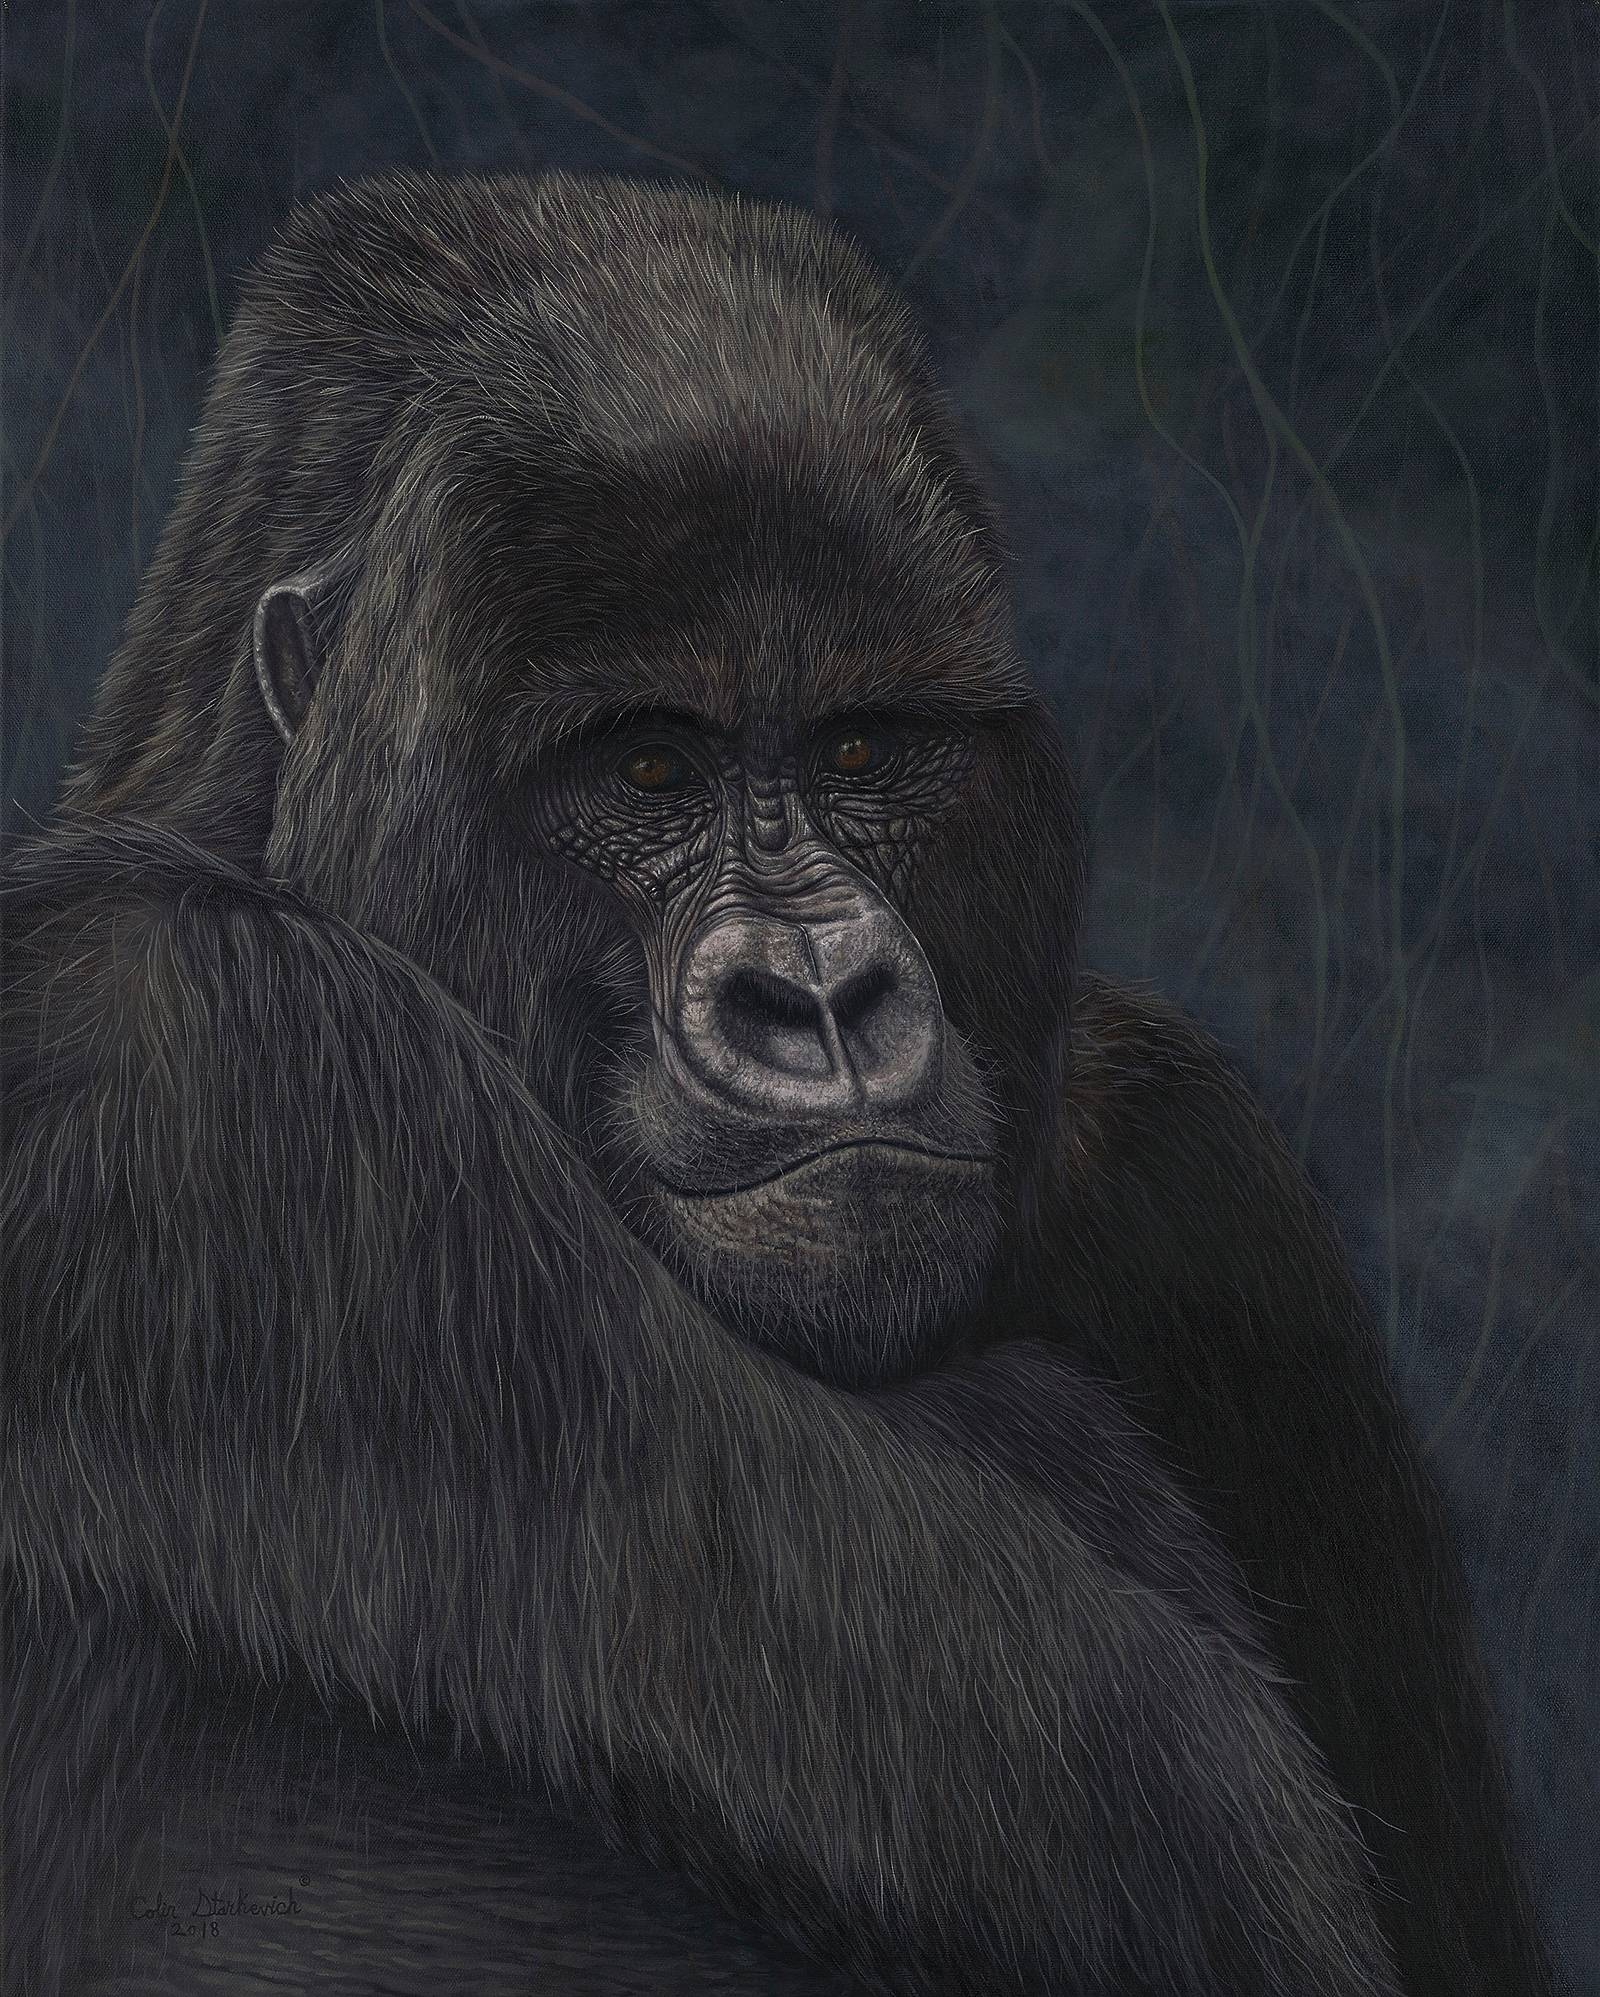 Keeper of Faith - Mountain Gorilla (24 by 30" oil on canvas) In Private Collection